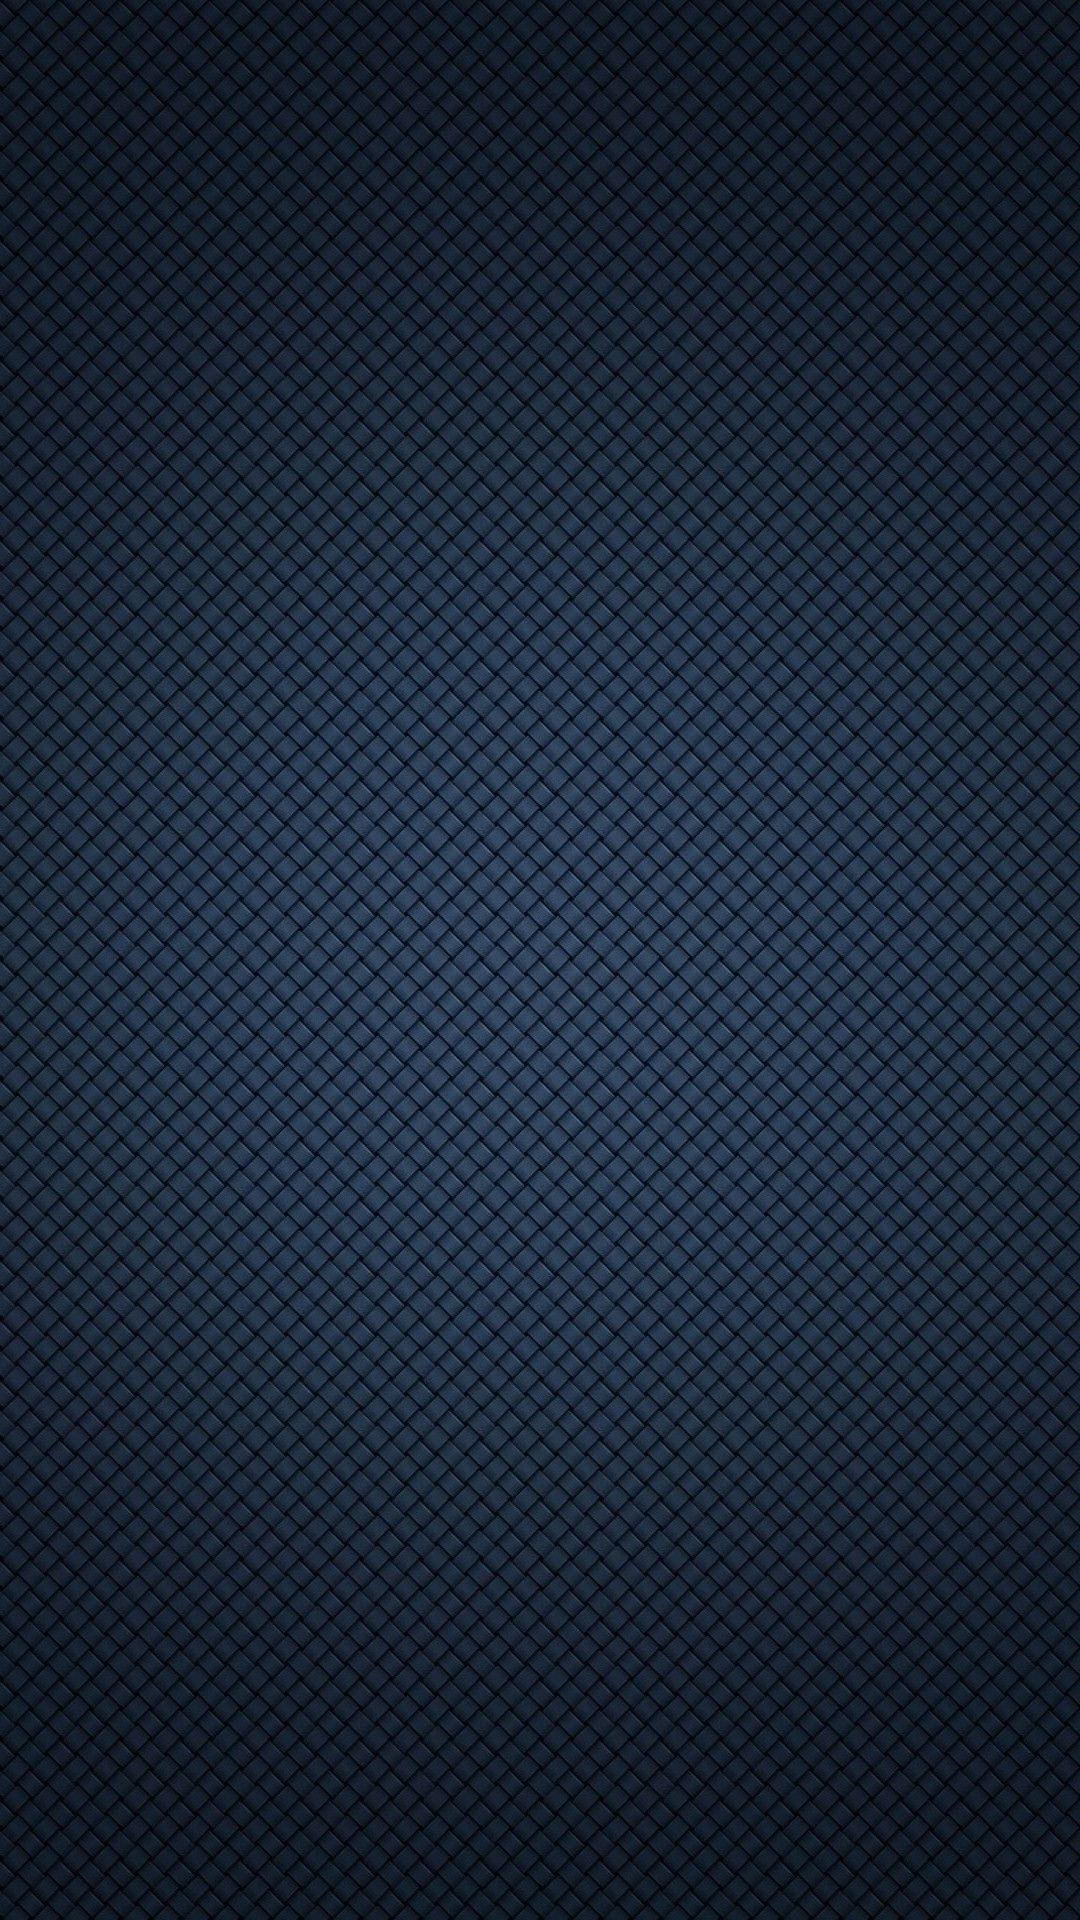 Blue rhombus pattern abstract htc one wallpaper